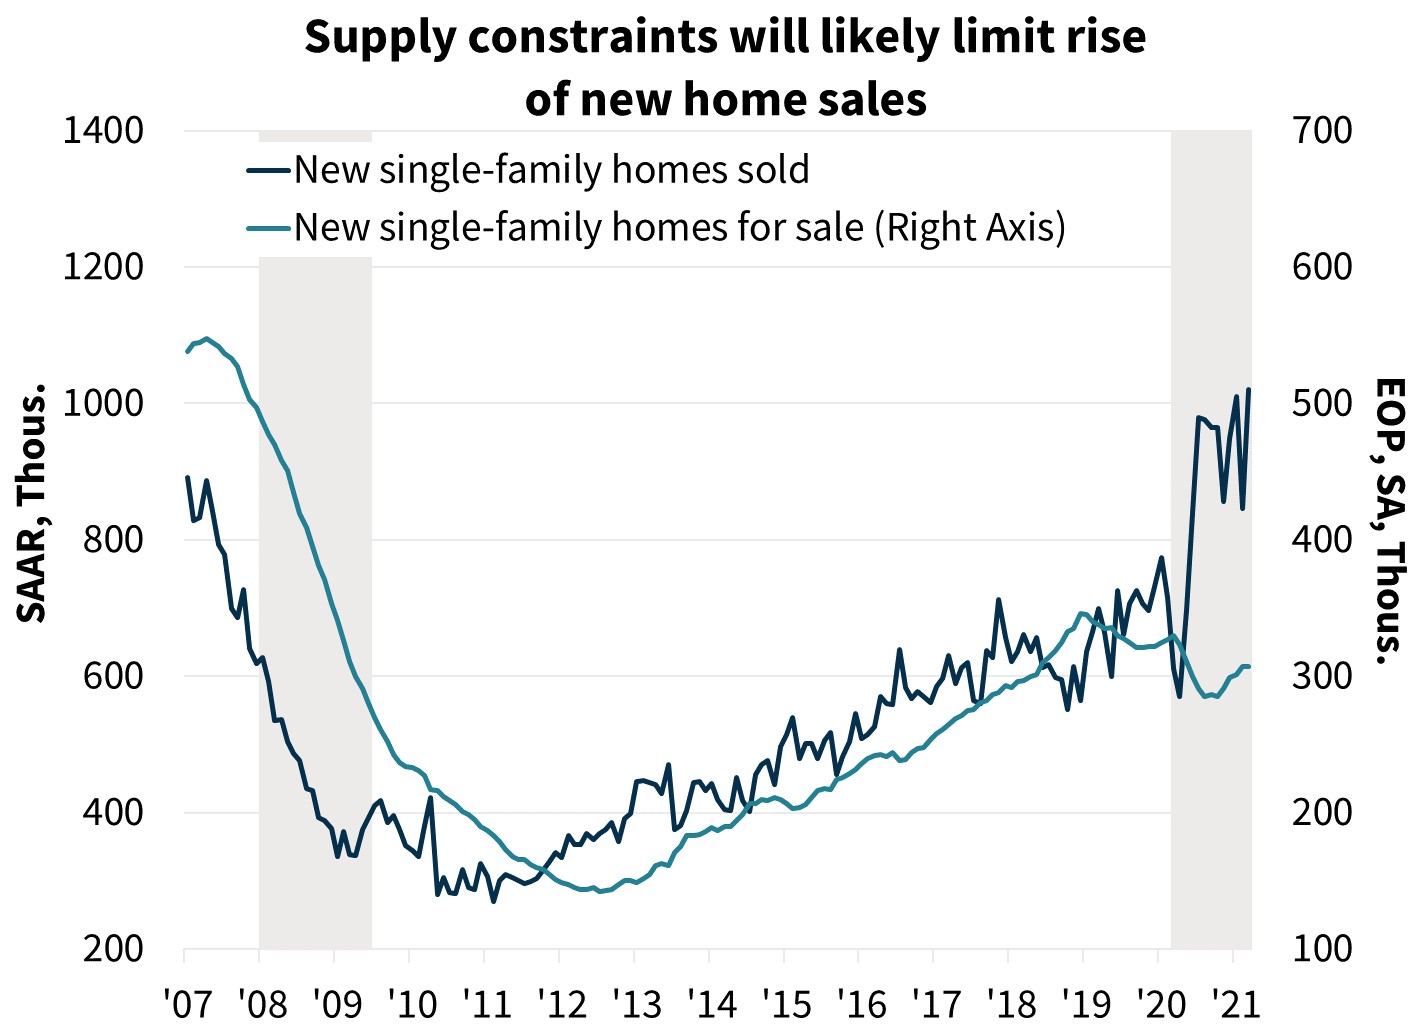  Supply constraints will likely limit rise of new home sales 